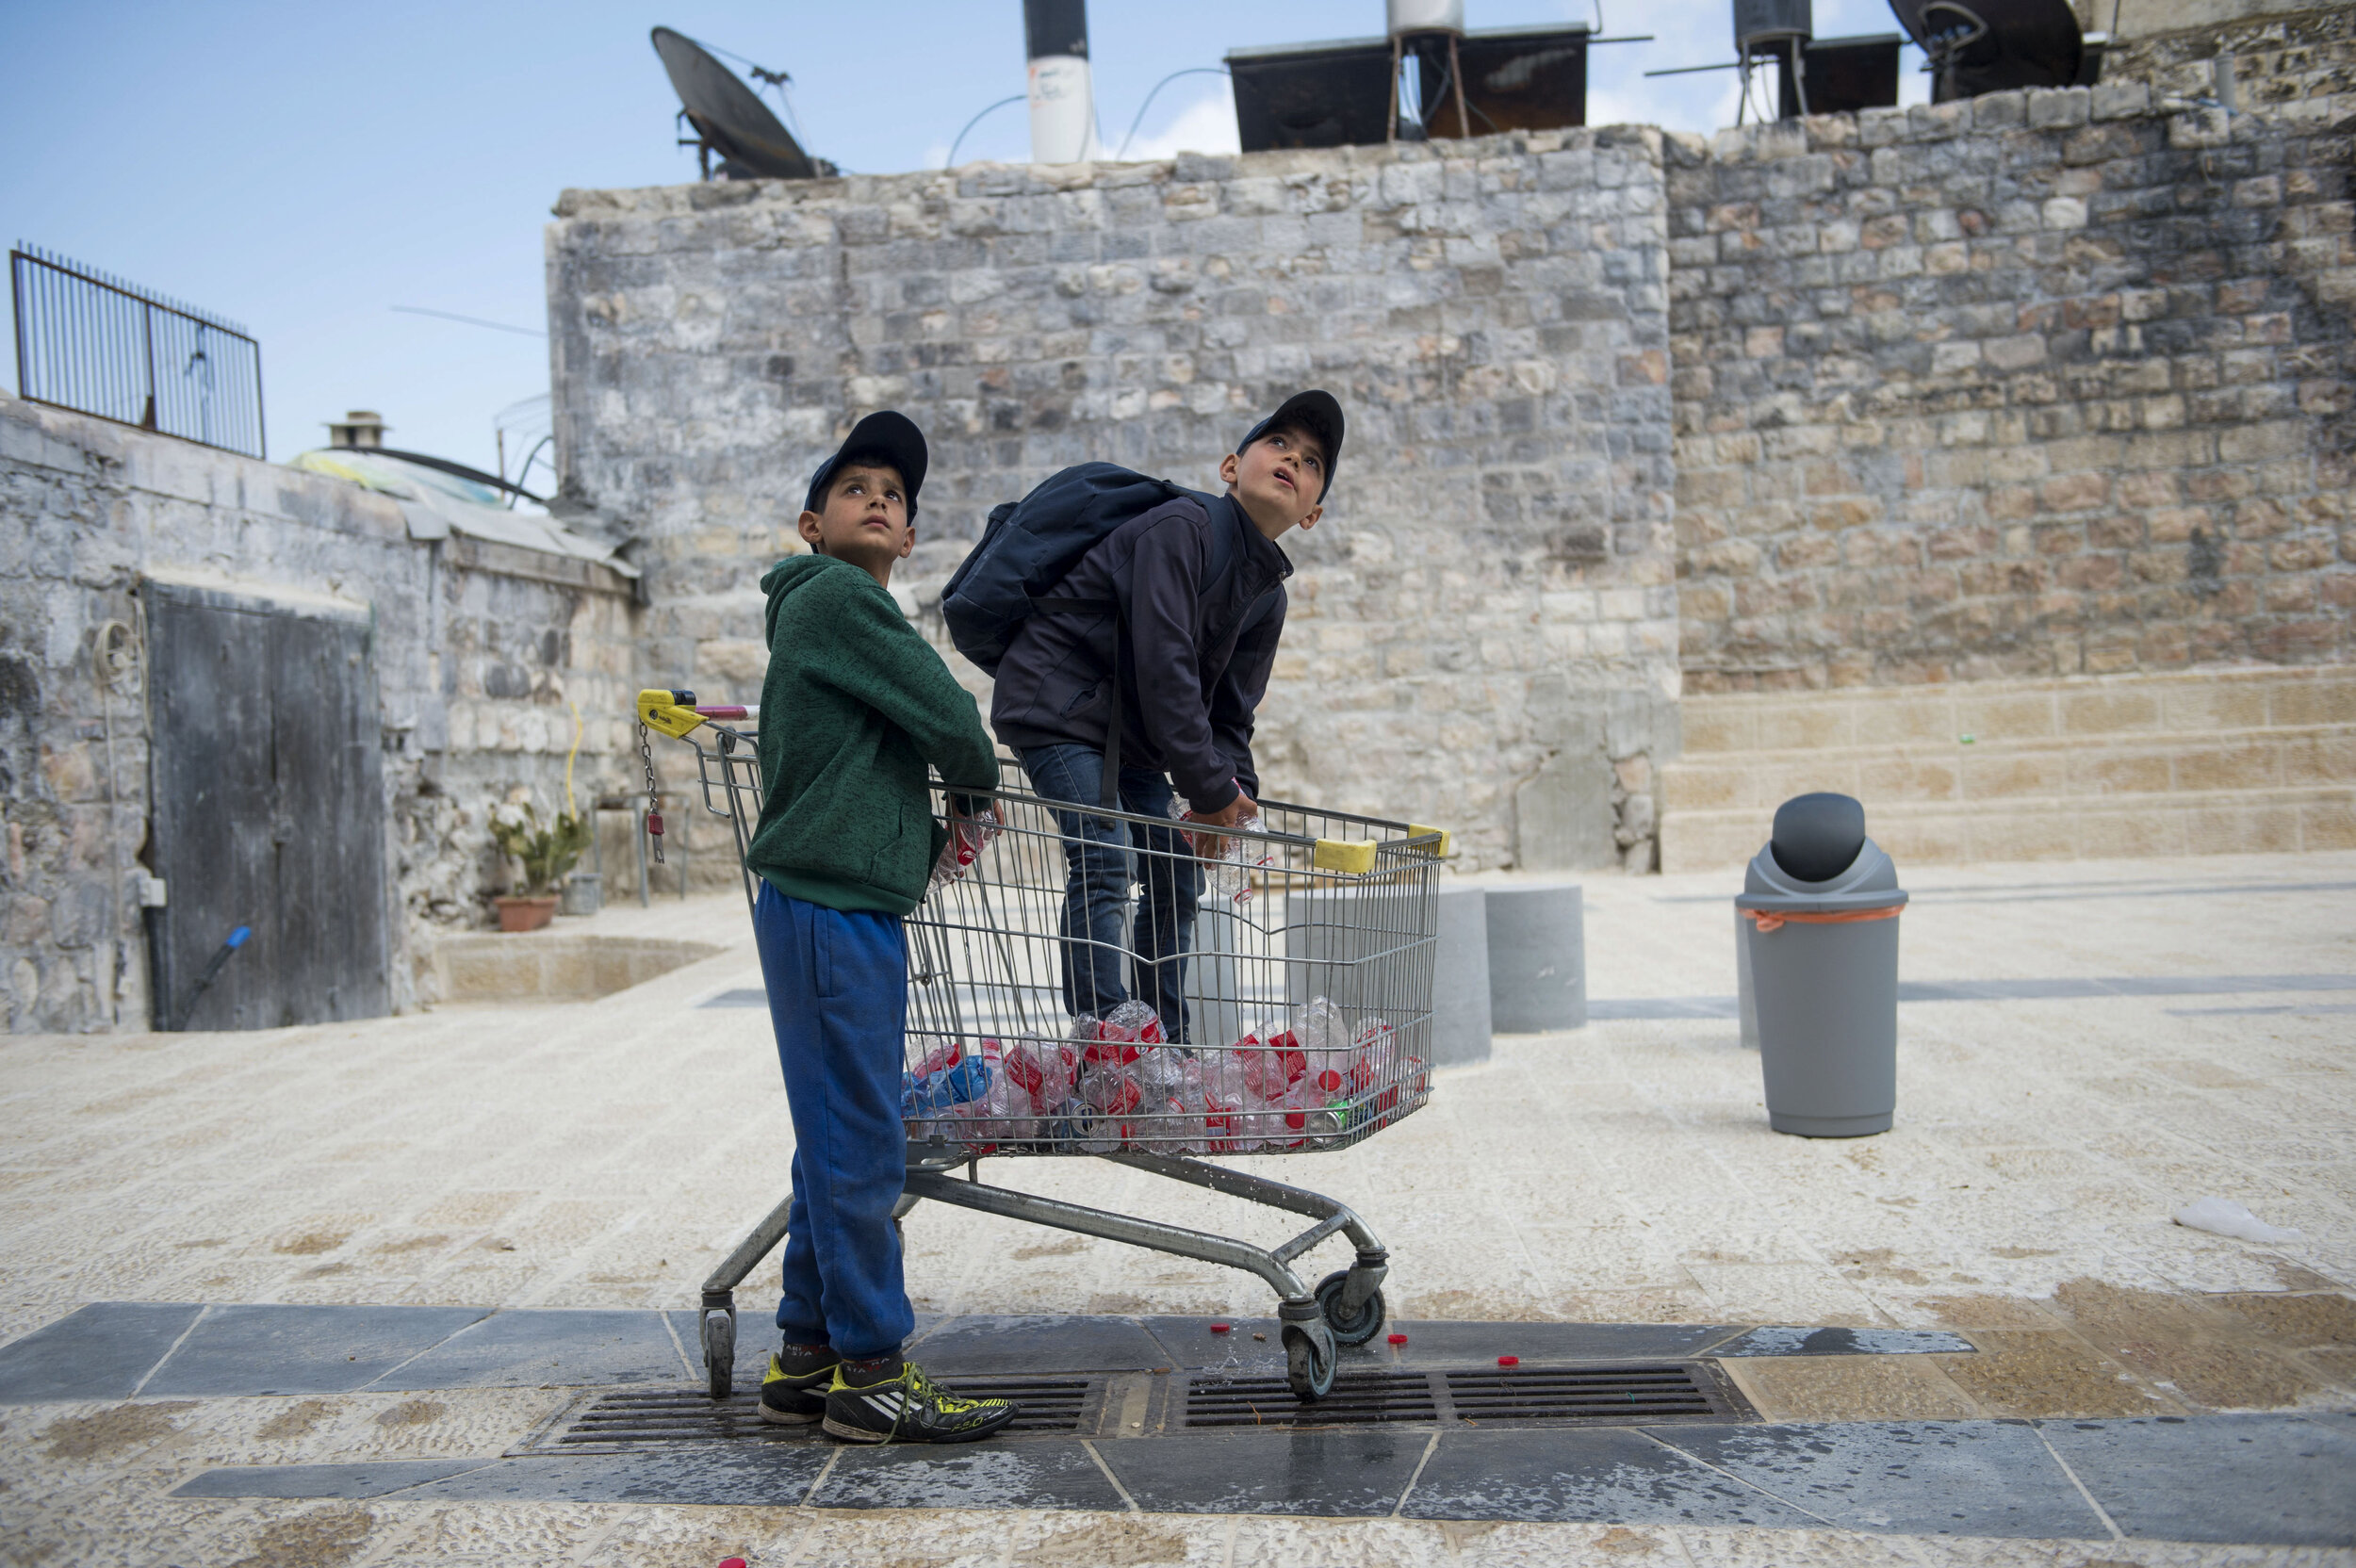  Palestinian youths look up at Israeli youths as they throw water bottles and shout insults at them shortly before the Flag March through the Old City in Jerusalem. The March occurs annually in Jerusalem and is a celebration commemorating the victory